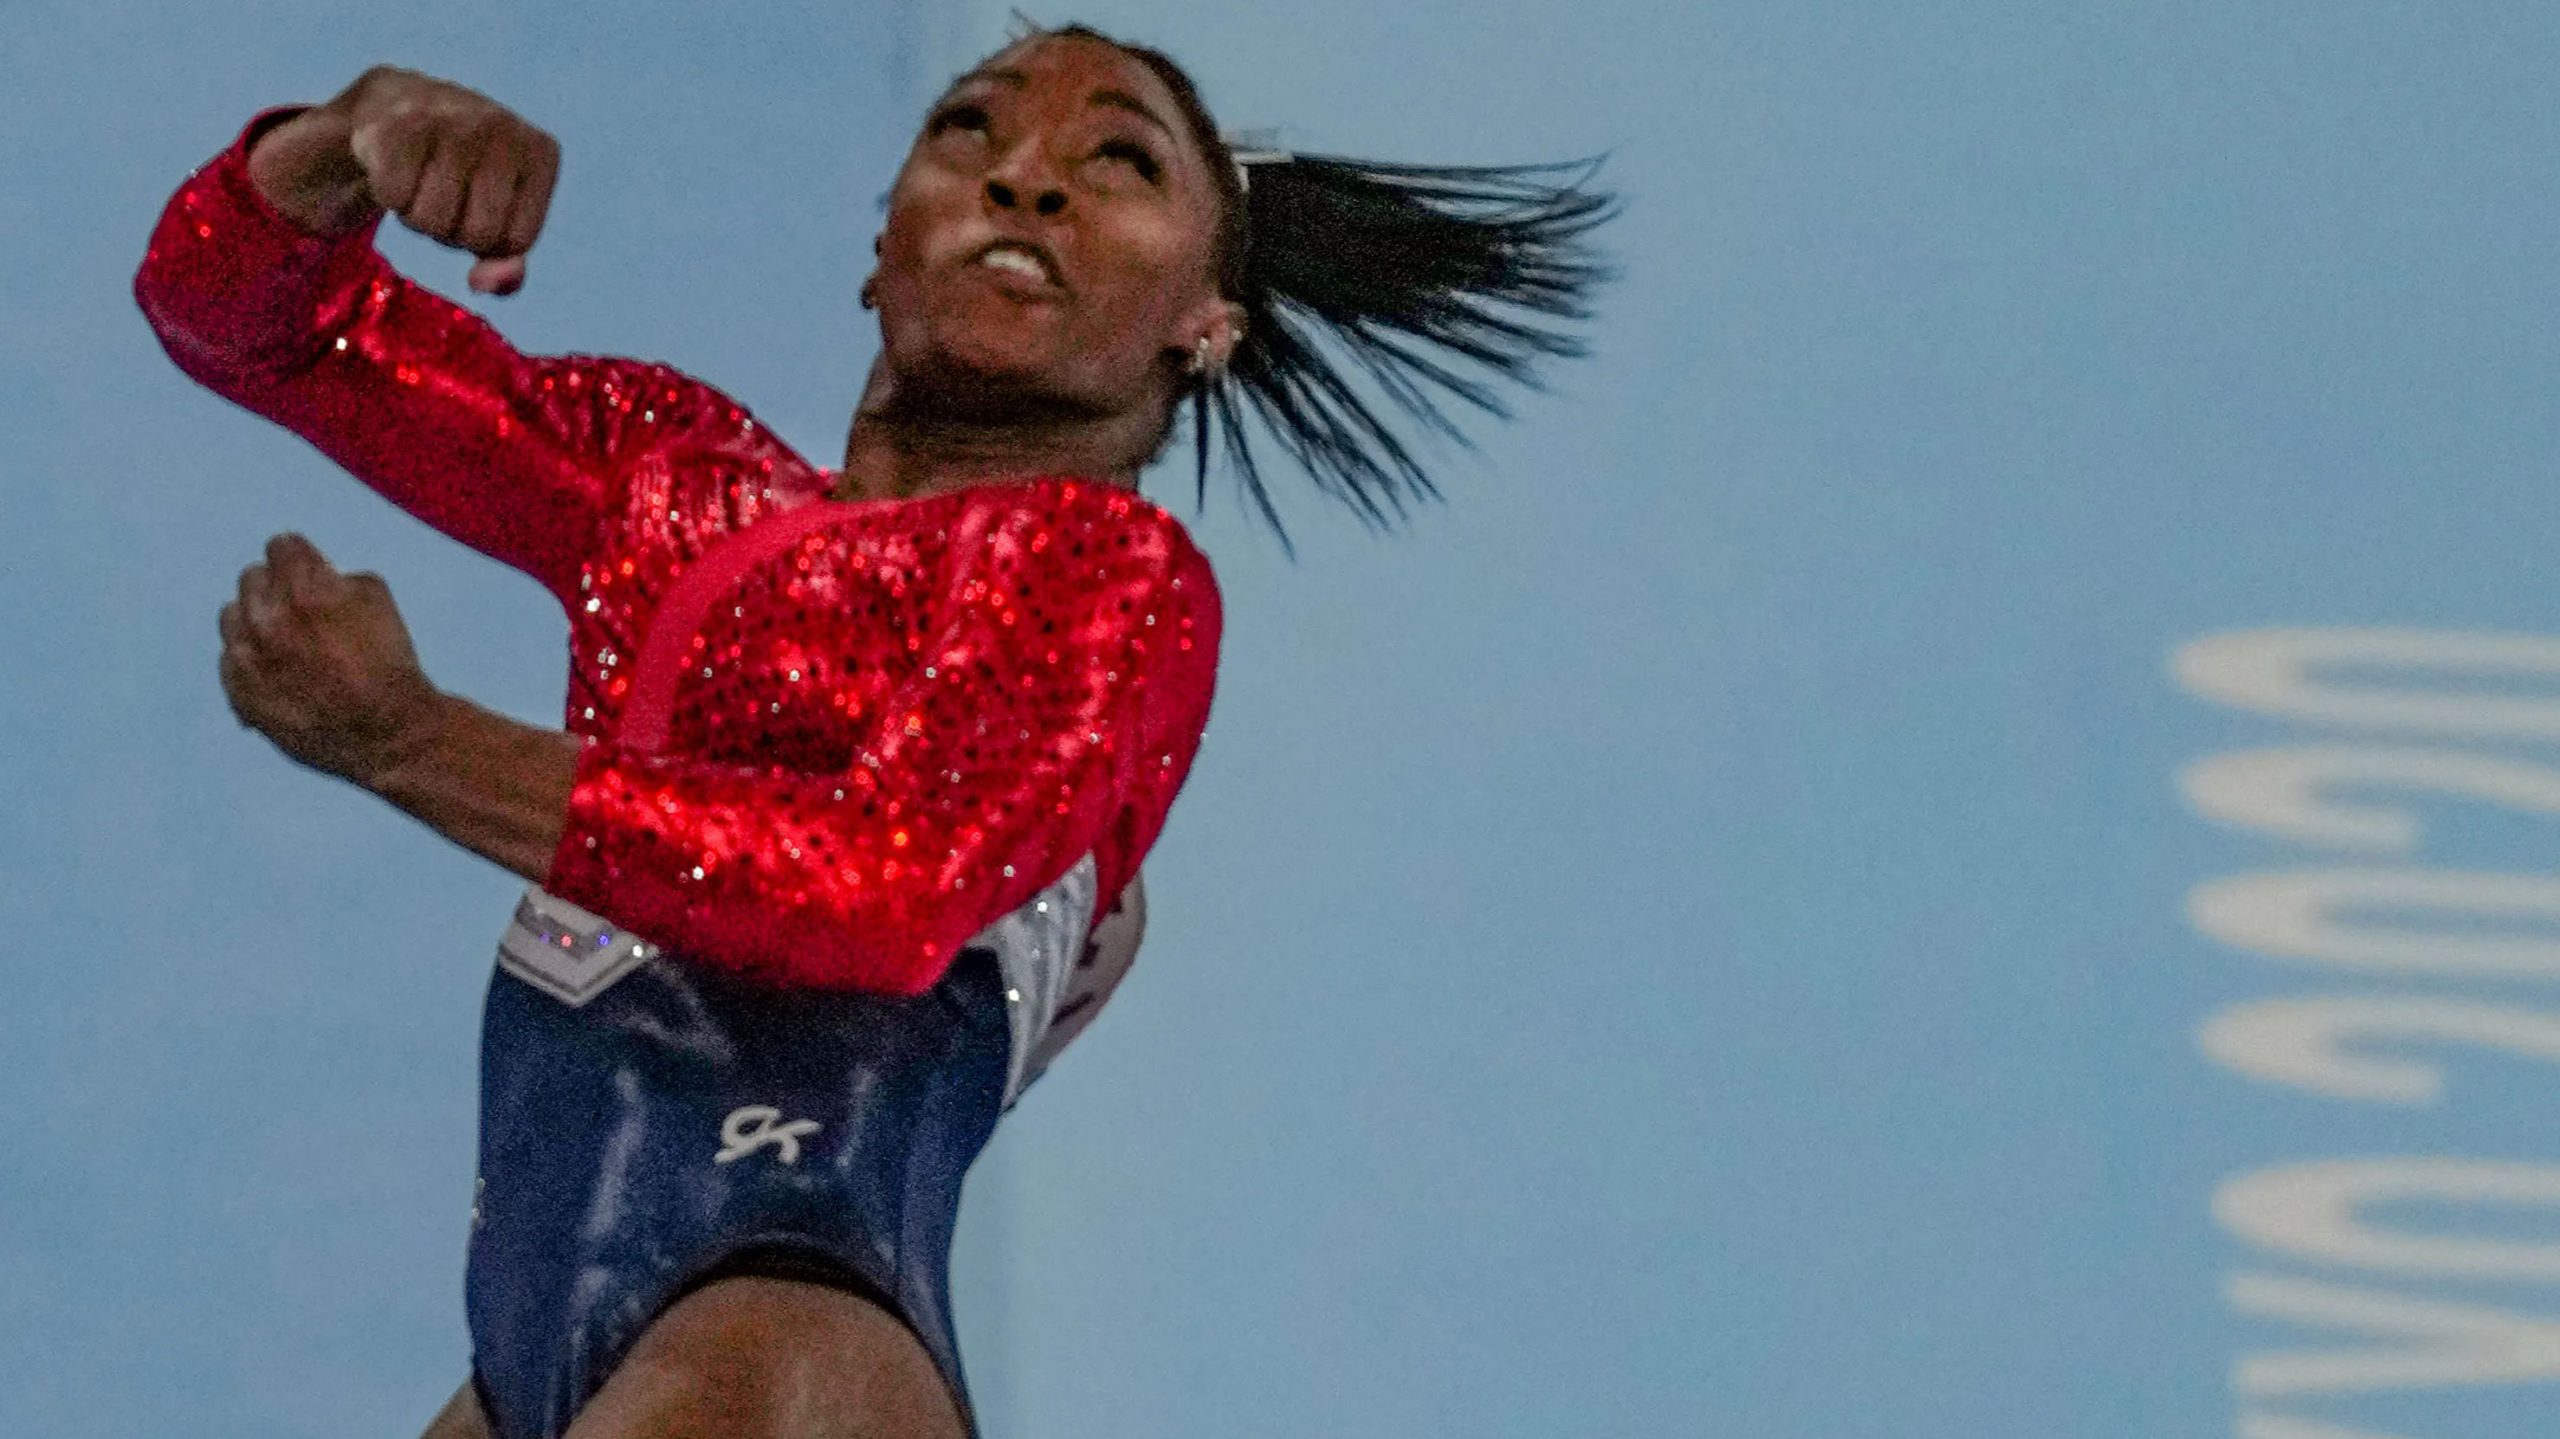 We have been failed: Simone Biles blasts FBI for botching Nassar sex abuse case